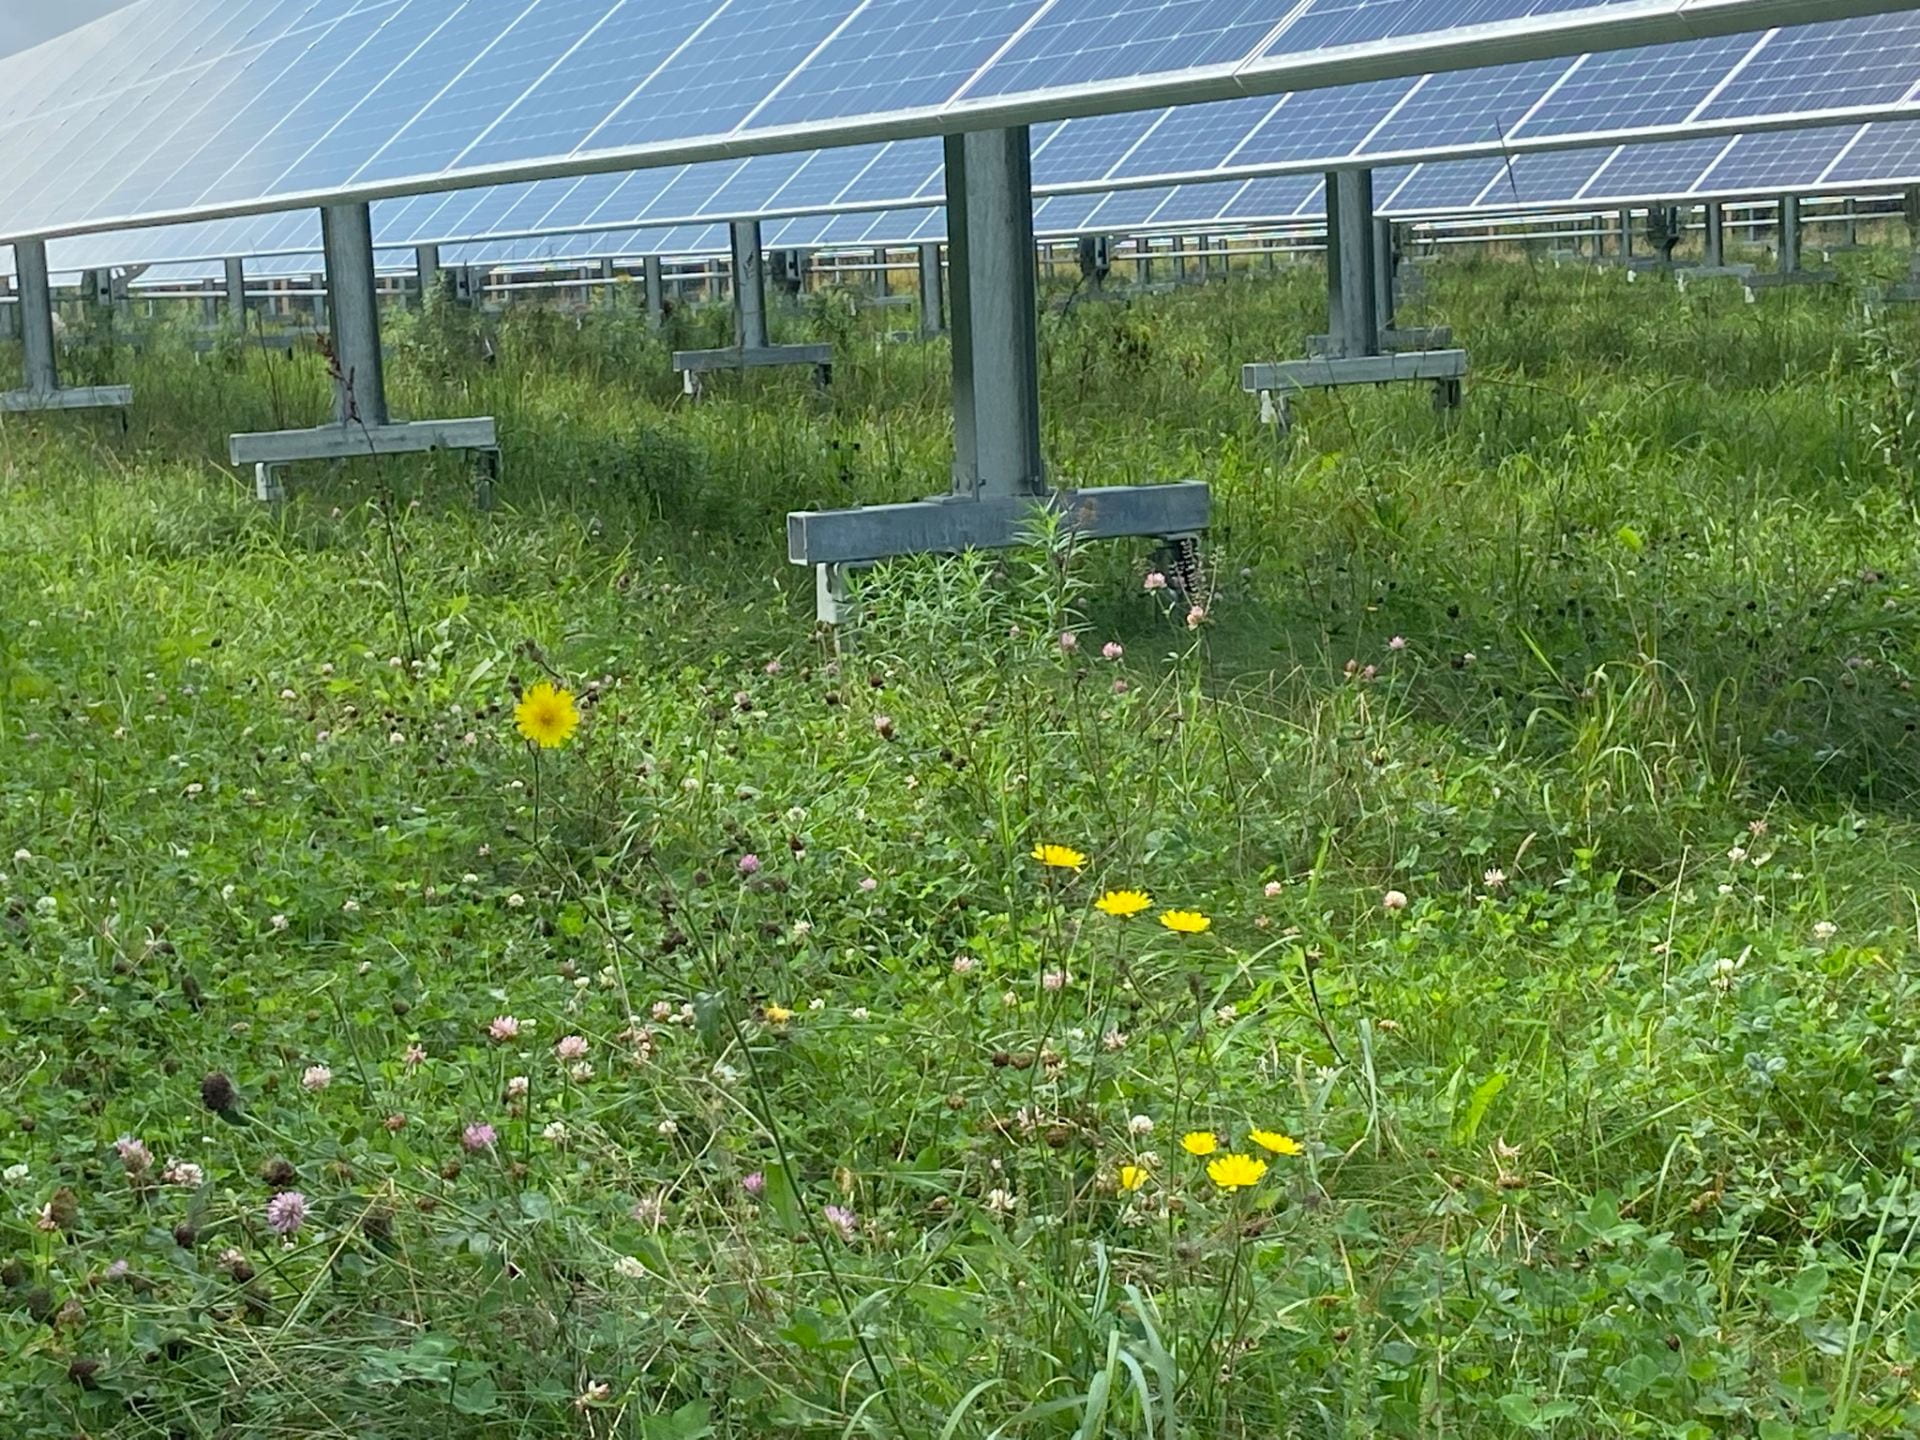 Clover and wildflowers growing under solar panels. Credit: Penn State MCOR